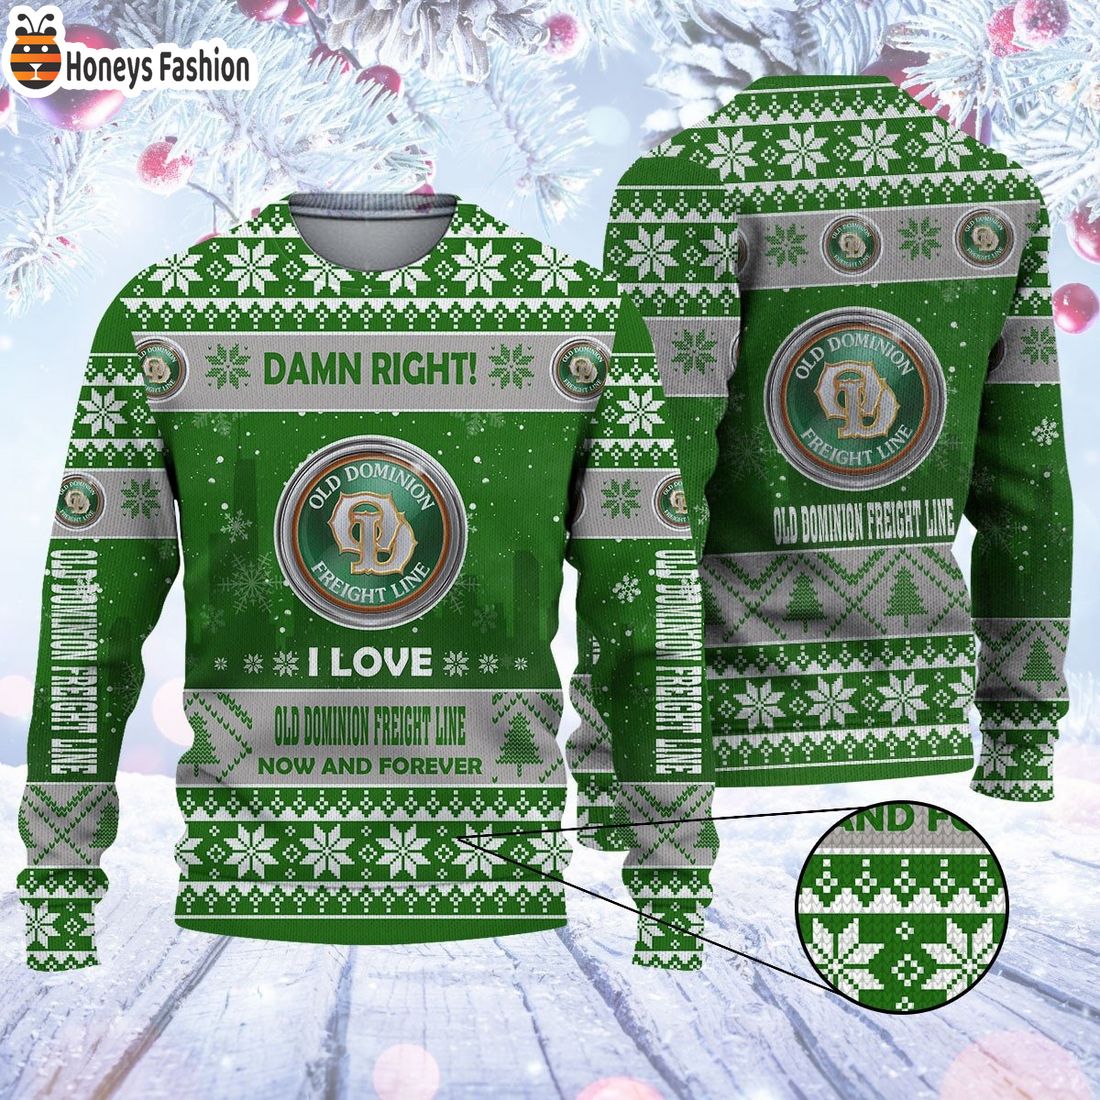 Damn right Old Dominion Freight Line now and forever ugly christmas sweater